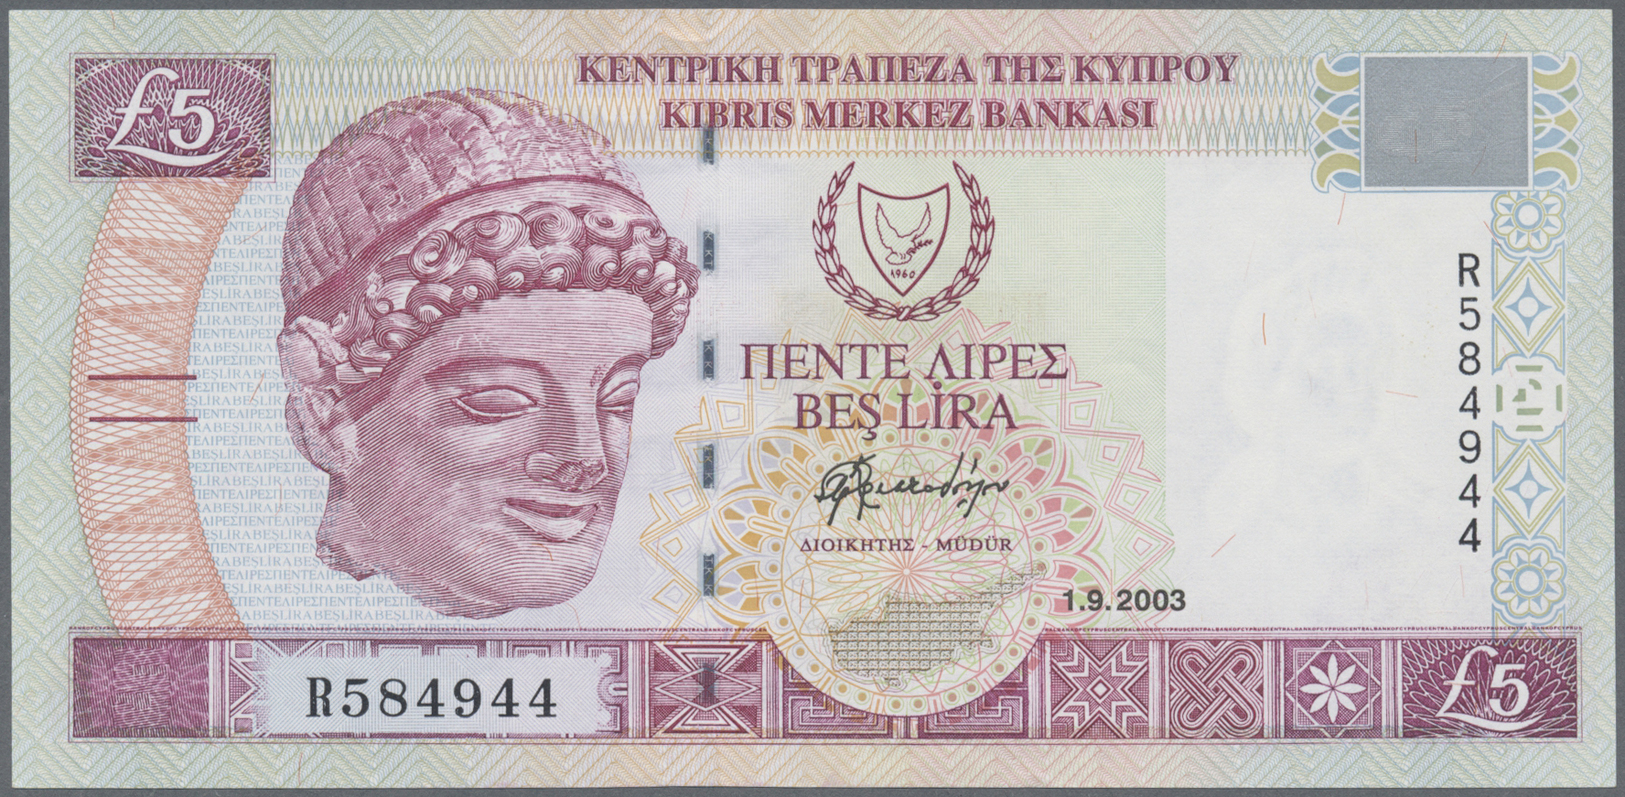 03543 Cyprus / Zypern: Set Of 4 Notes Containing 1 Pound 2004 (2x), 5 Pounds 2003 And 10 Pounds 2005, In Condition: UNC. - Chypre